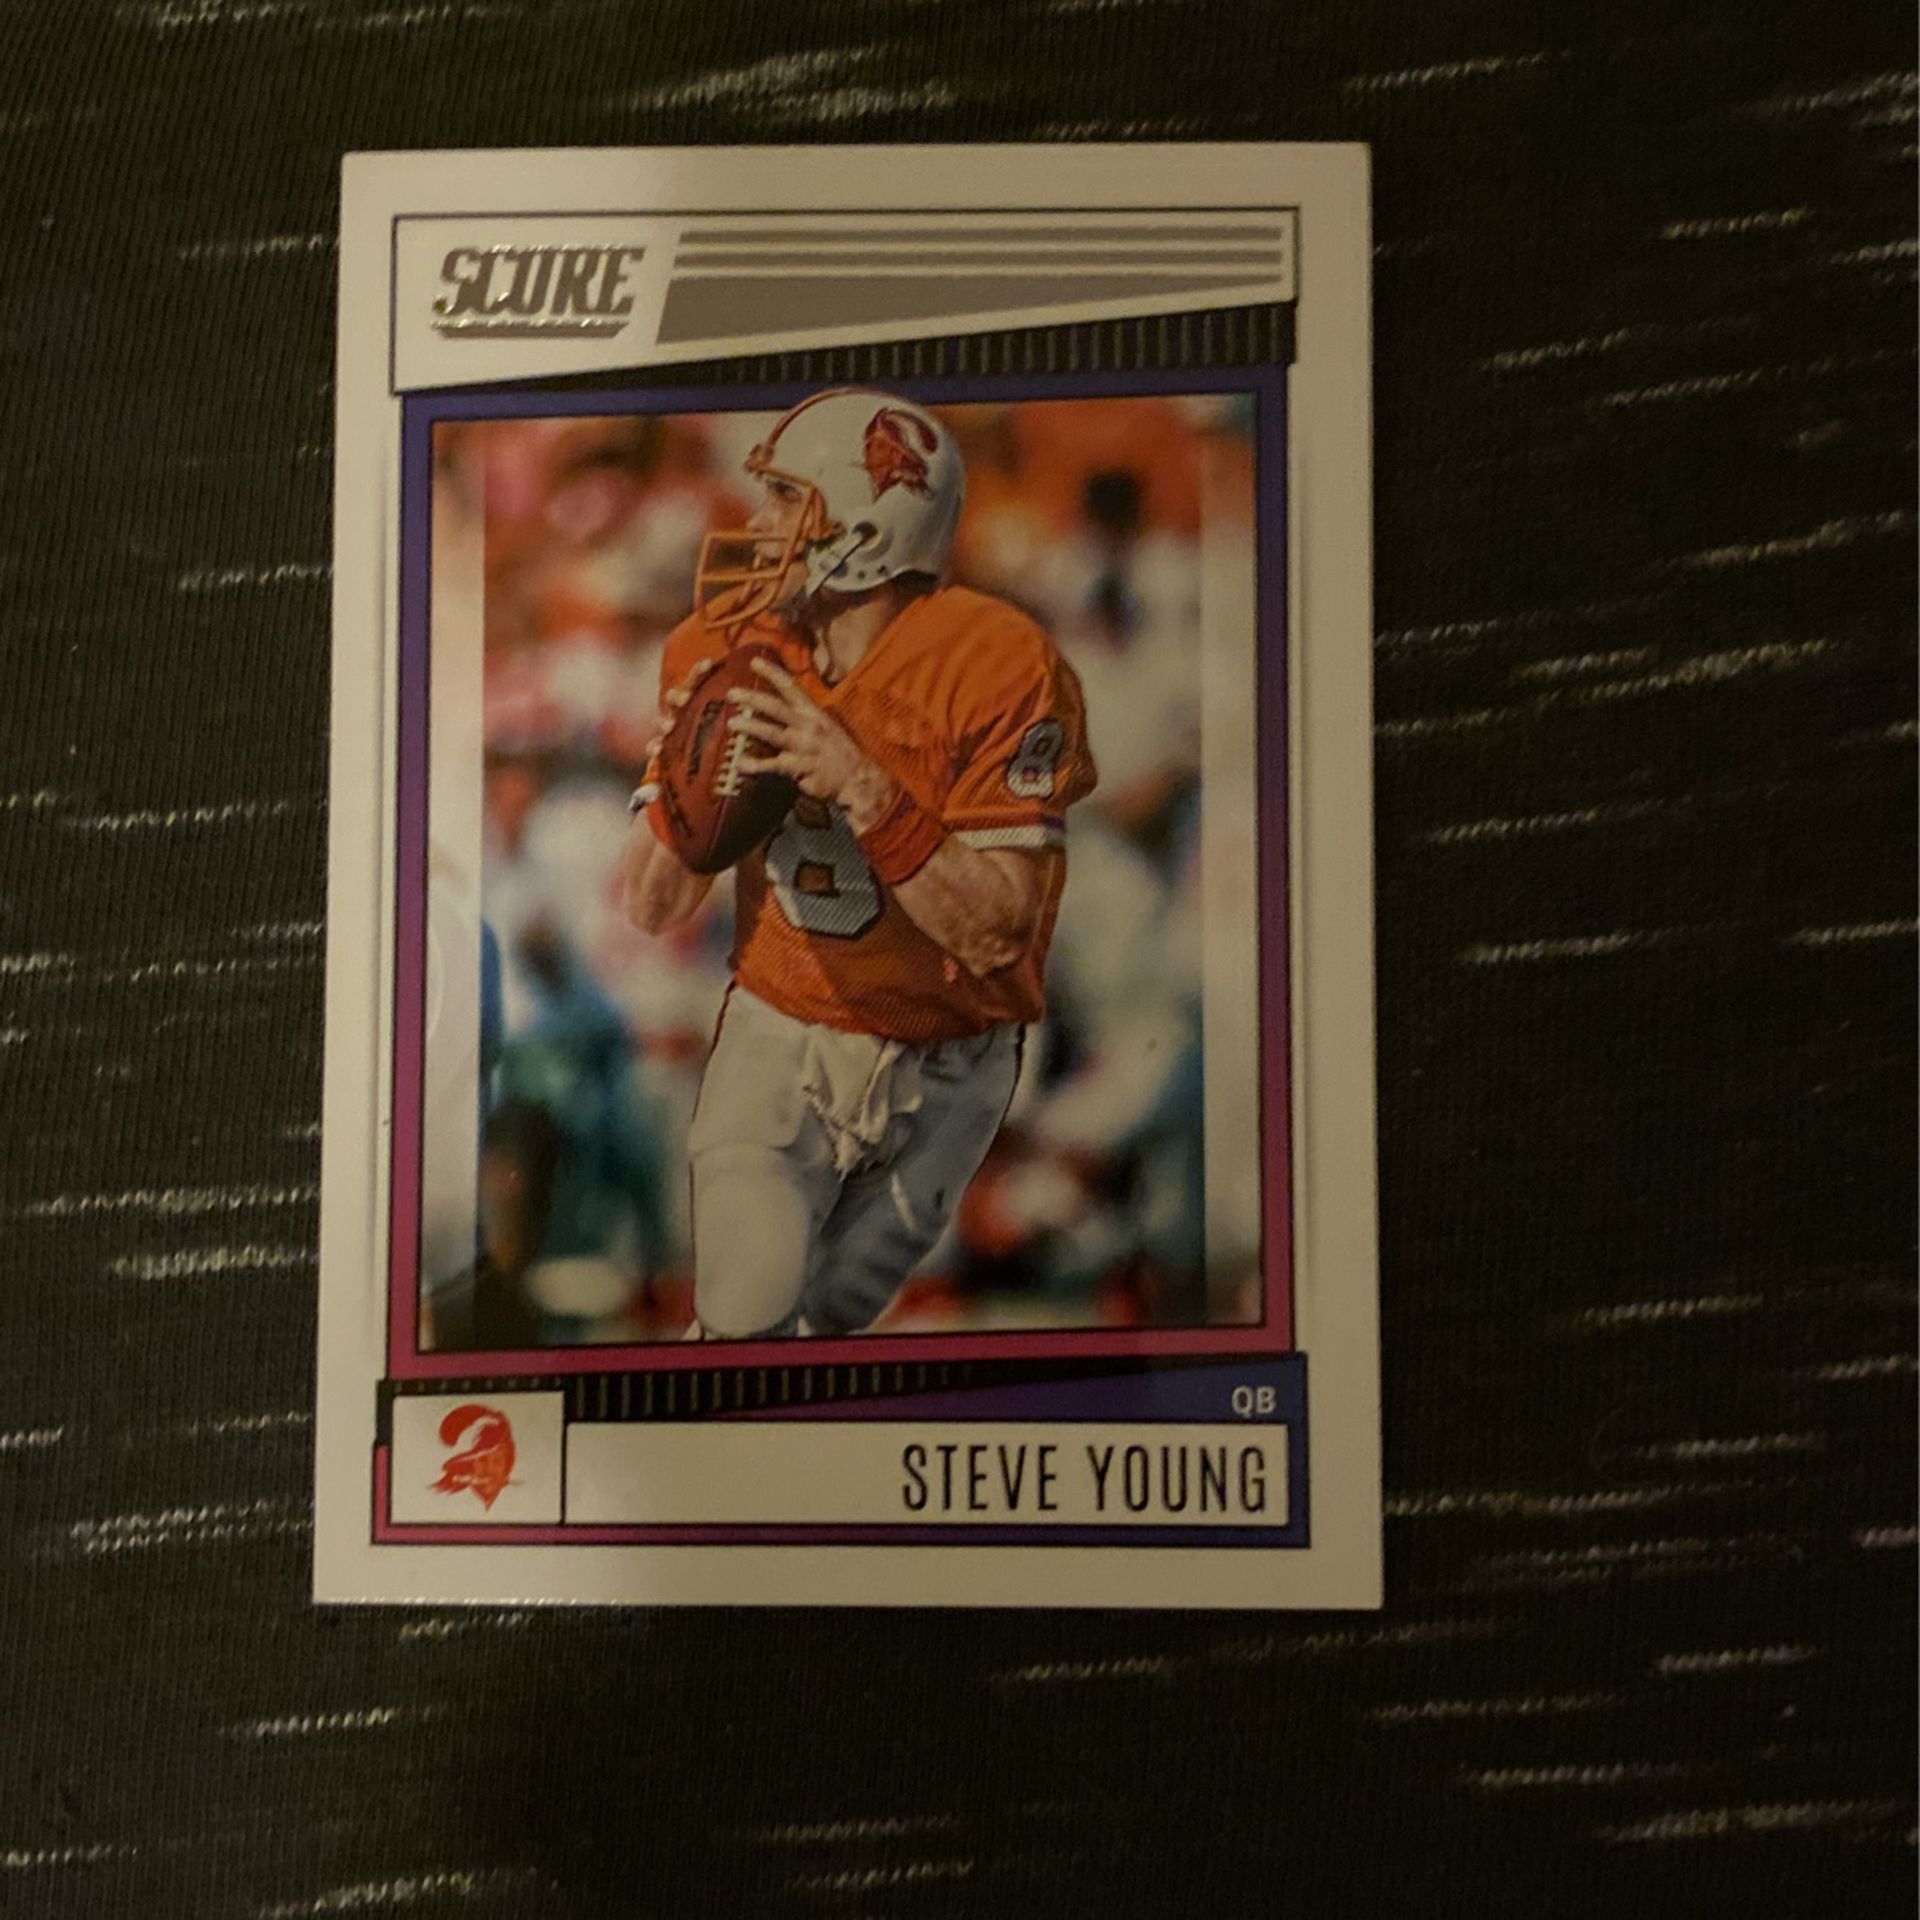 Steve Young Score Card